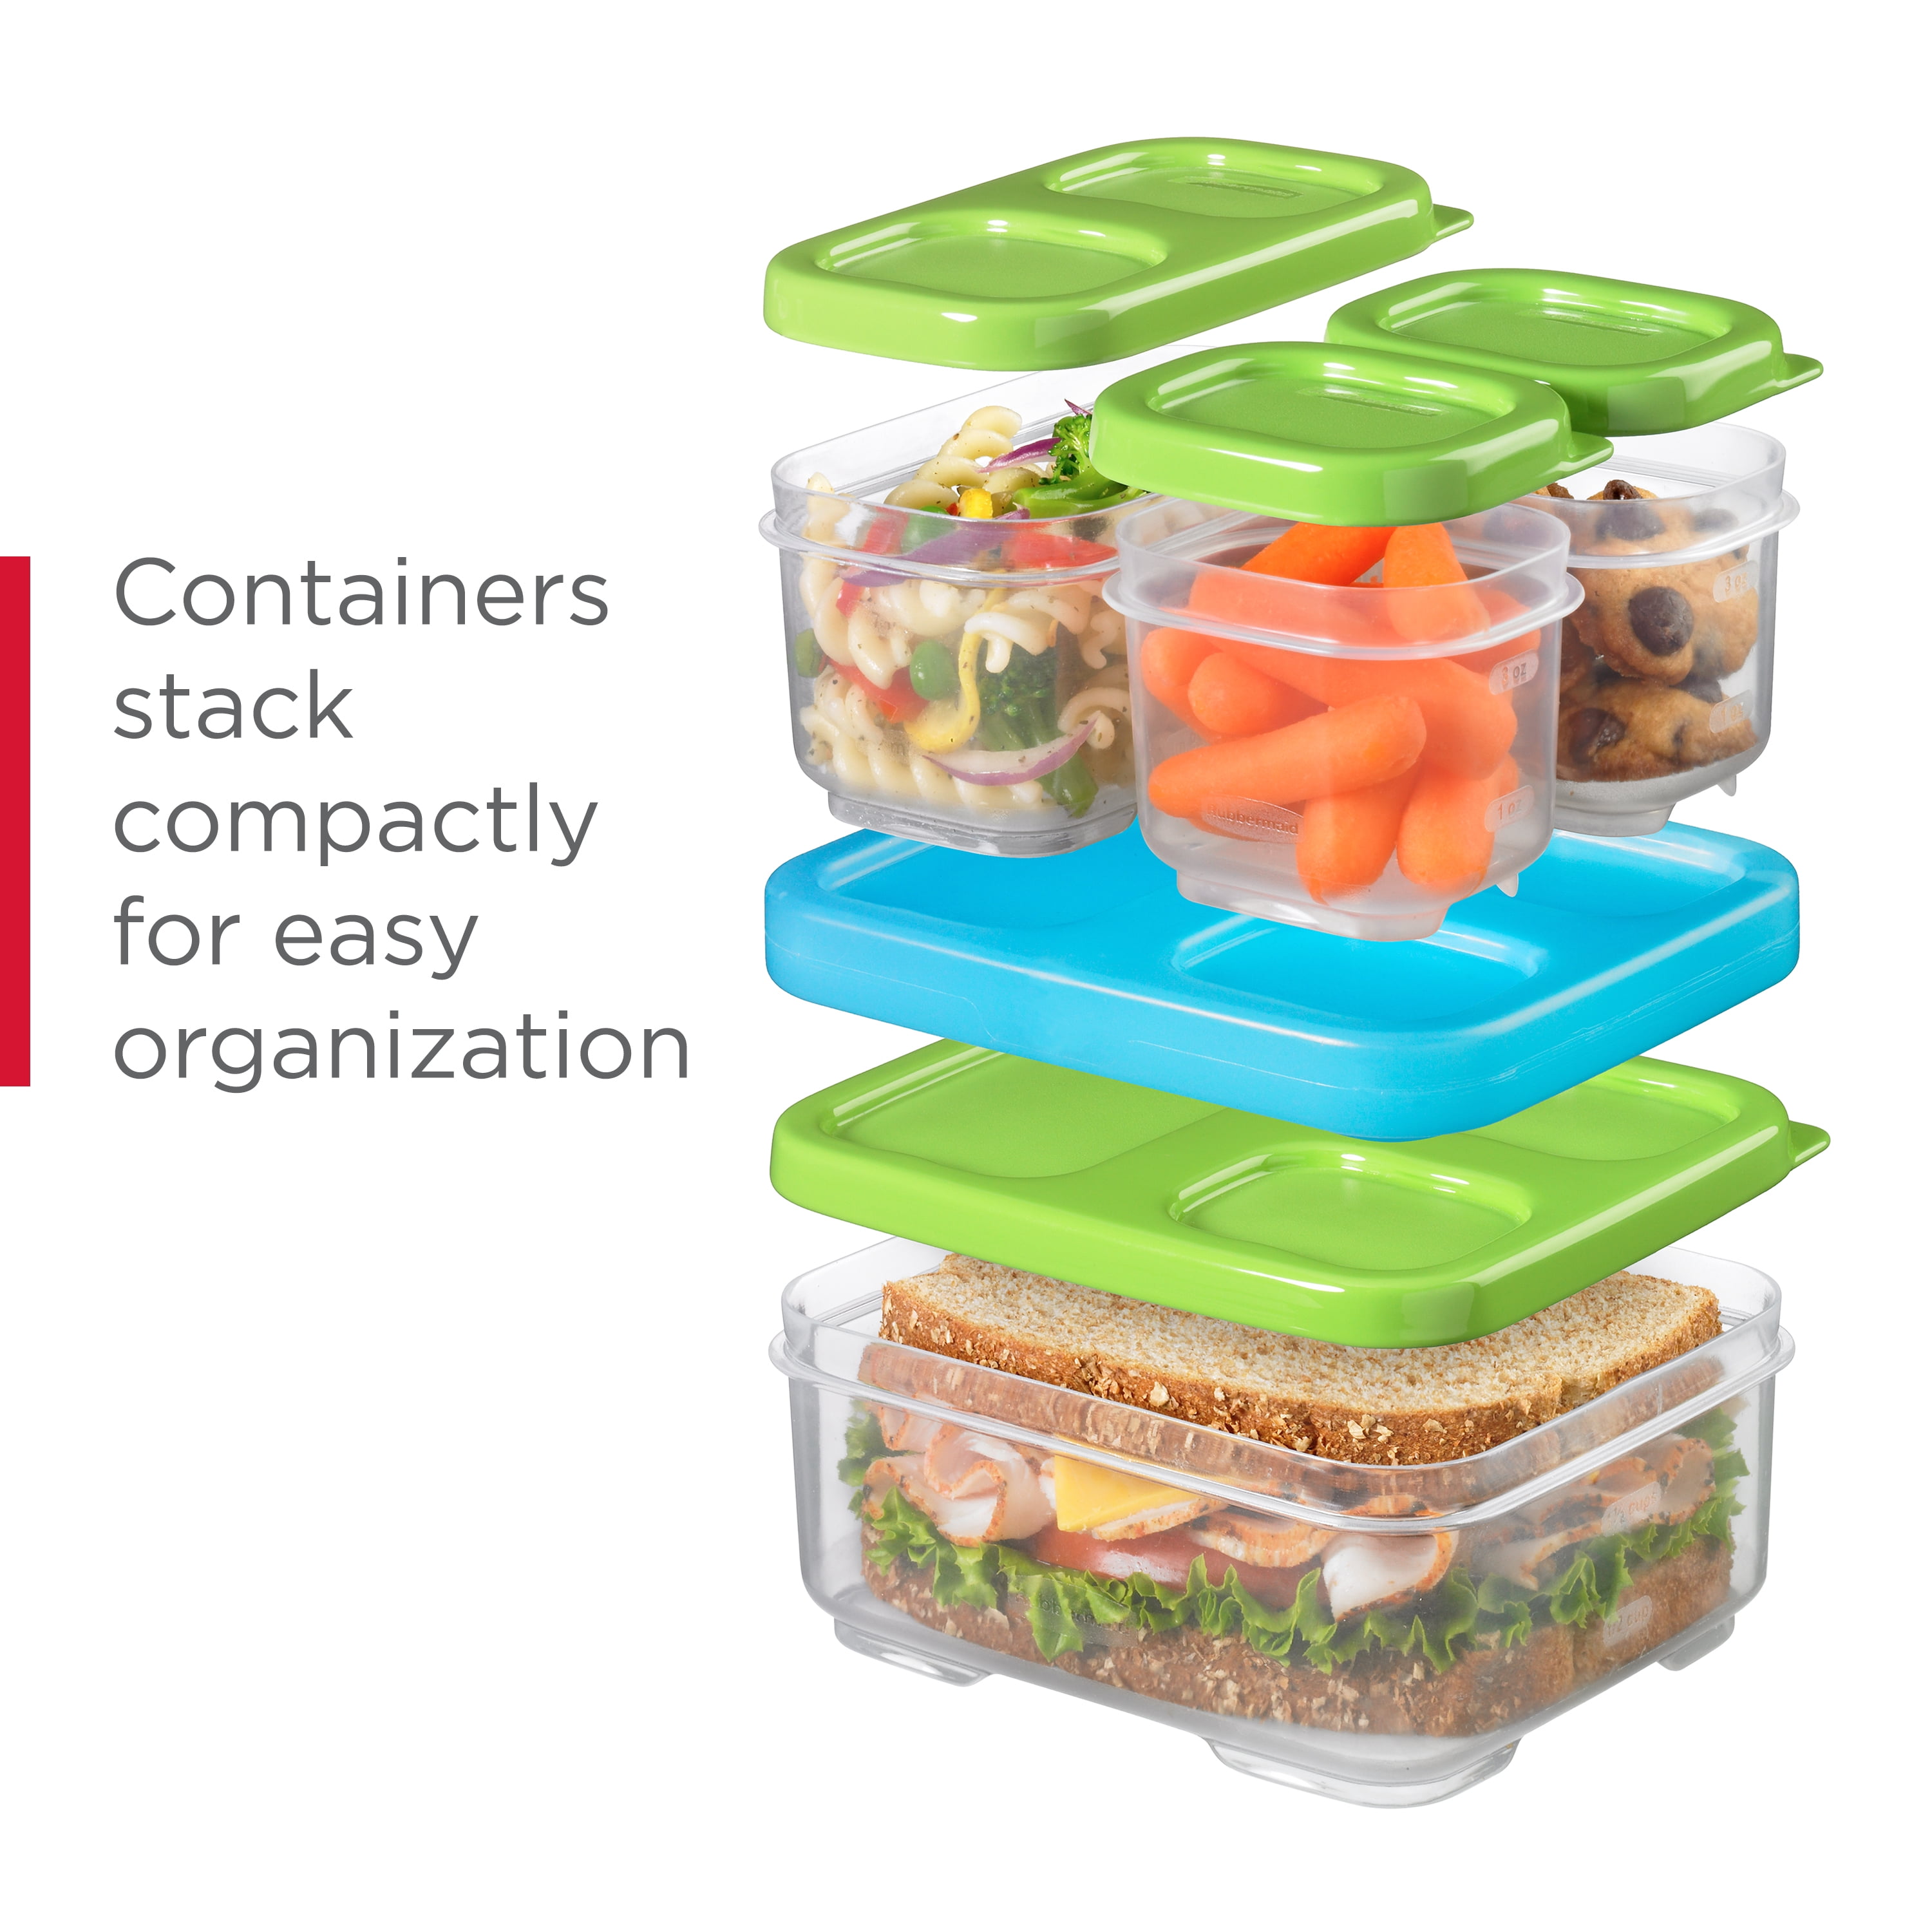 Rubbermaid LunchBlox - Lunch Containers, Rubbermaid LunchBl…